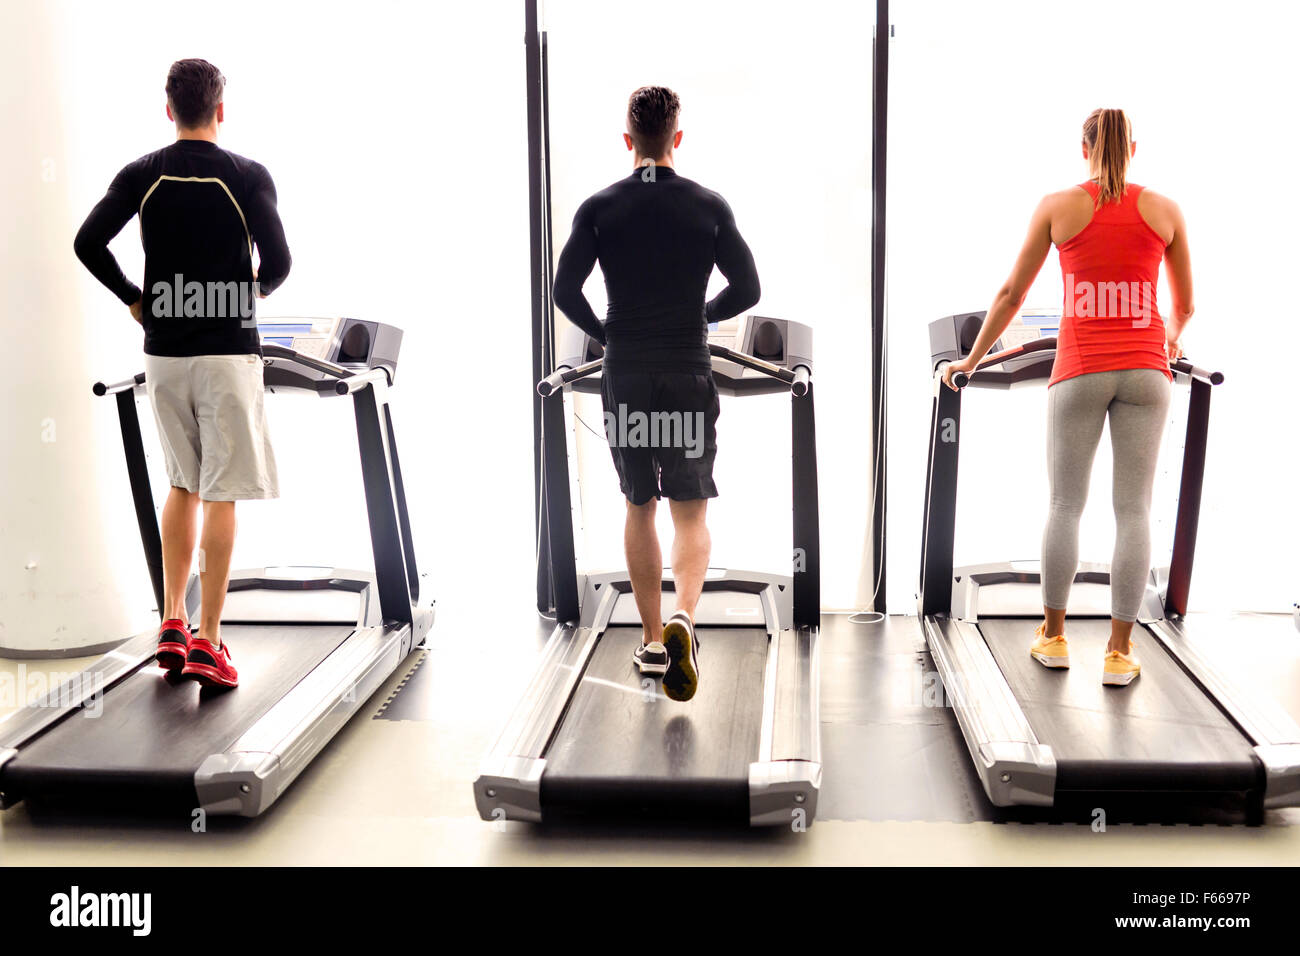 Group of young people using treadmills in a fitness center Stock Photo